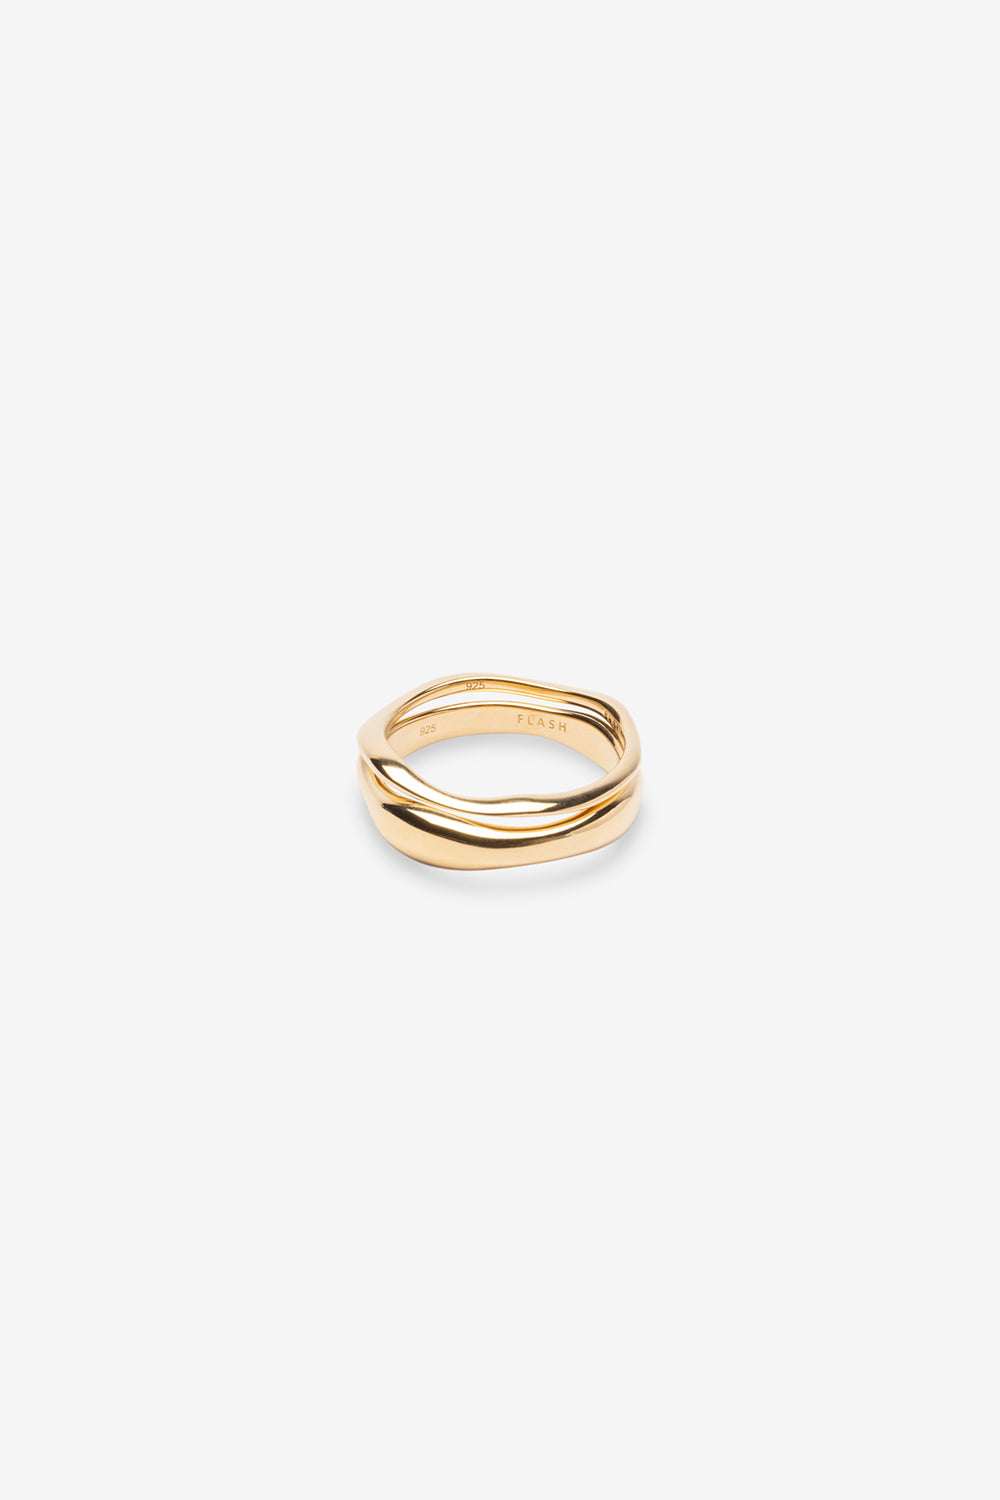 Waves Ring Set - Solid 9k Gold | Low In Stock